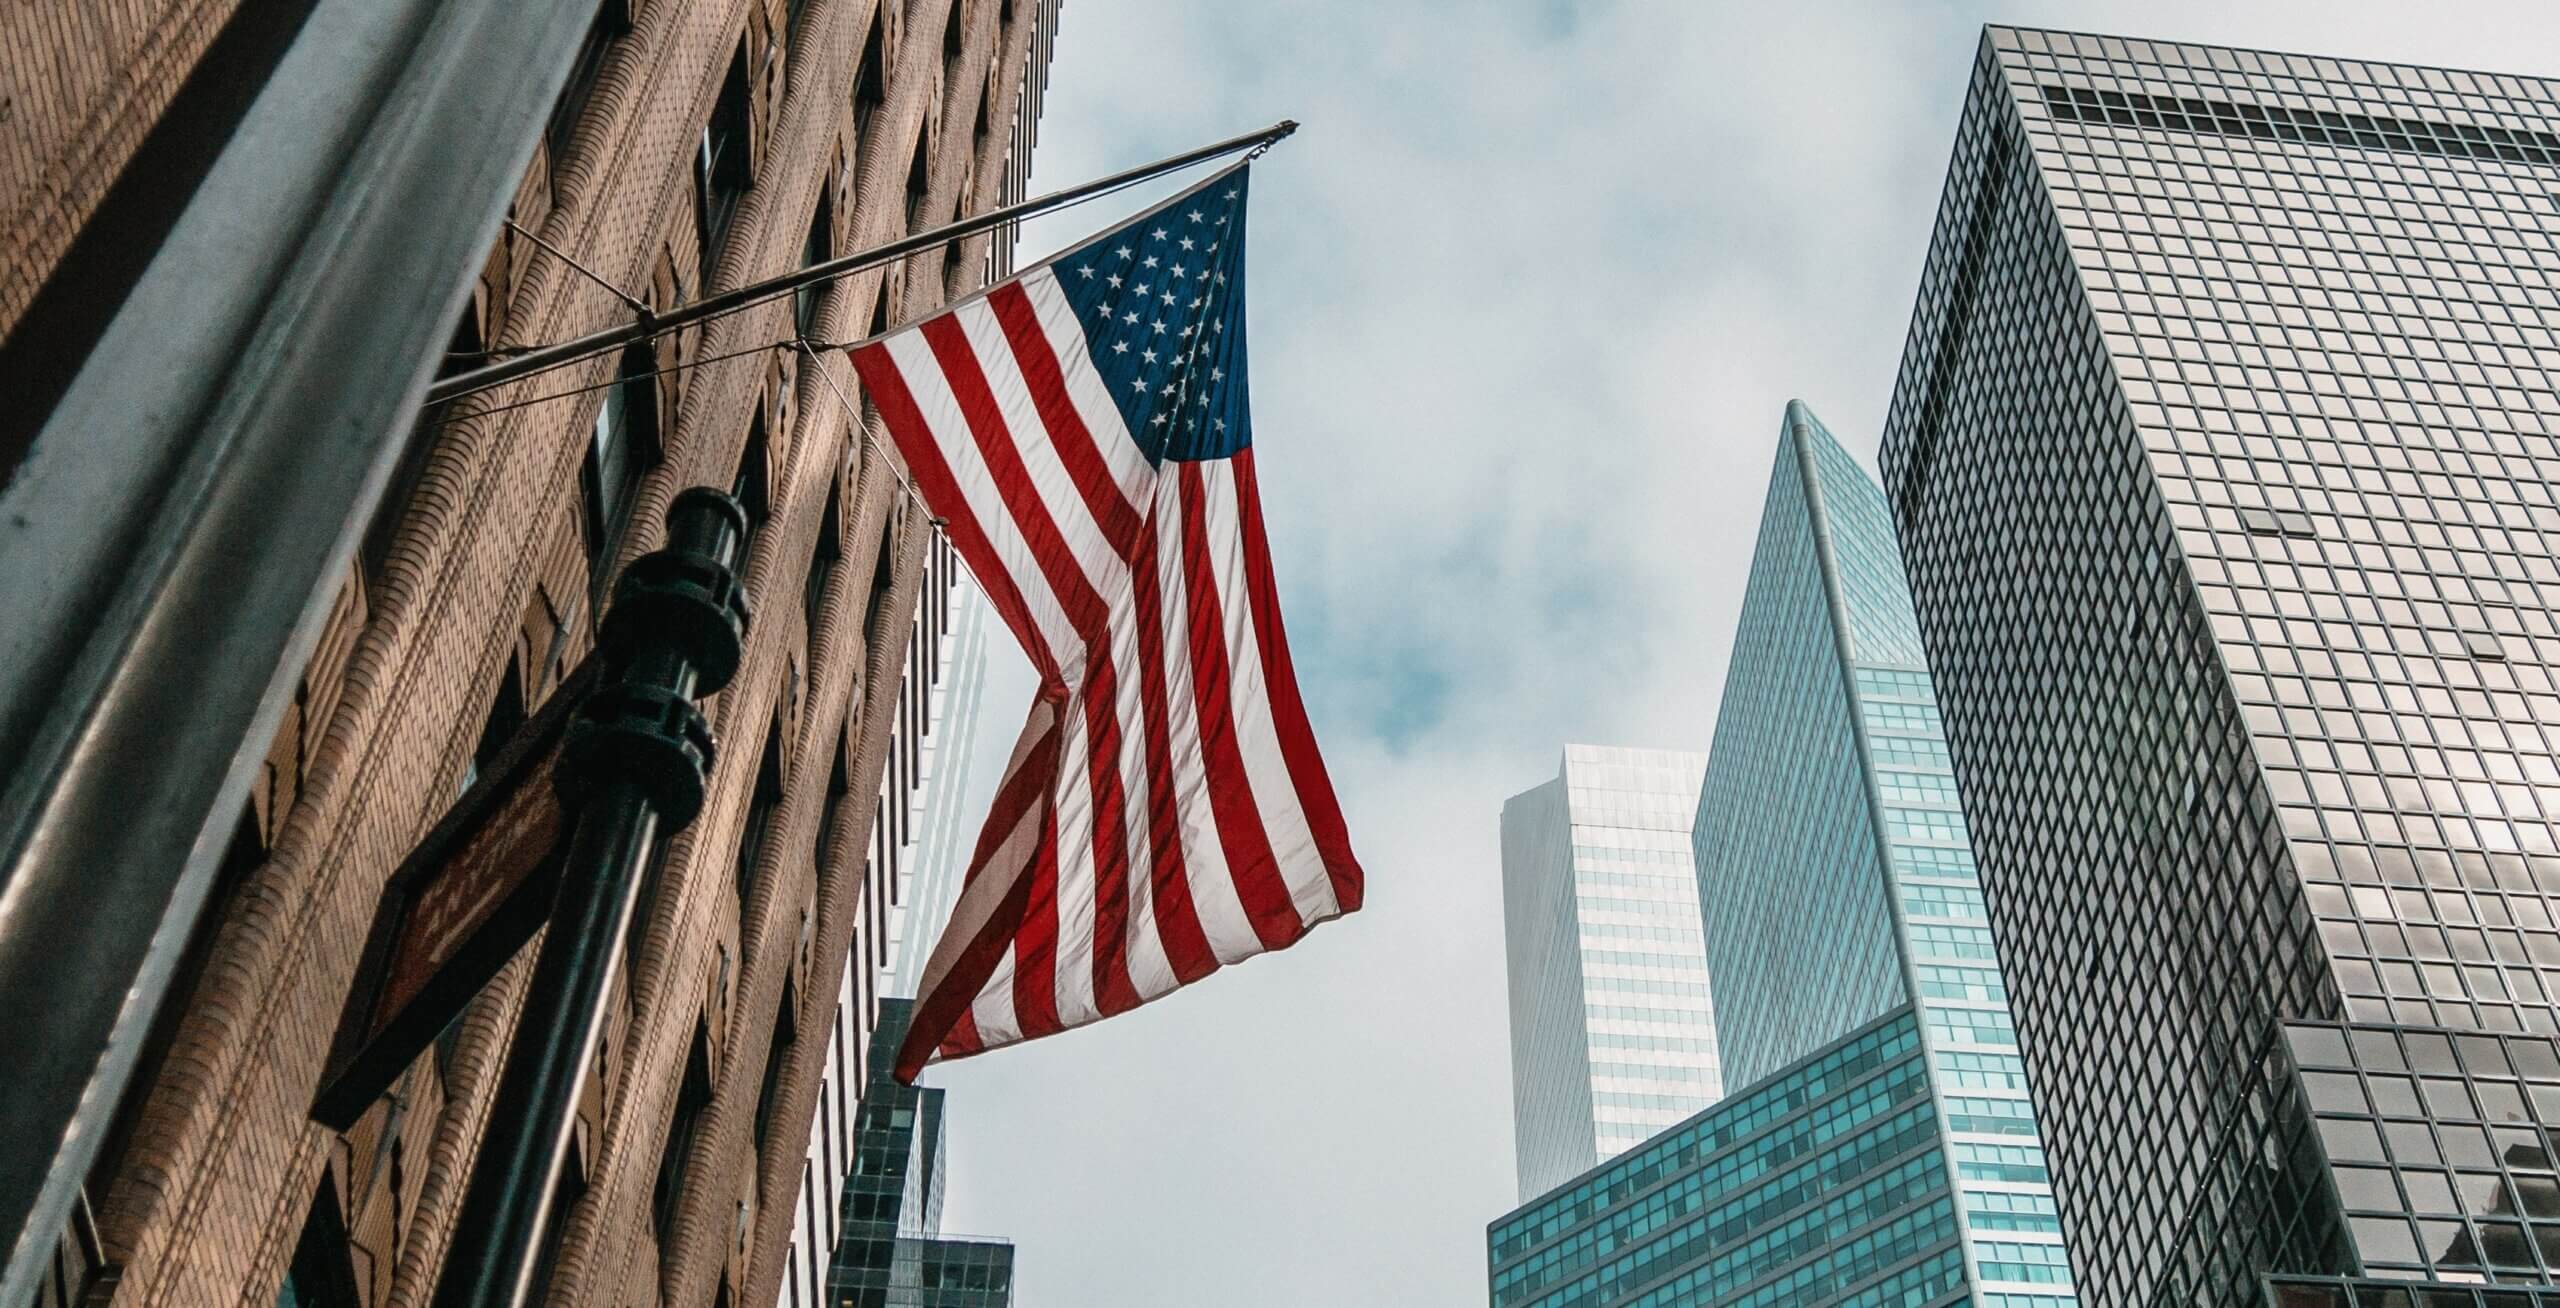 The USA Or United States Of America Flag On A Flagpole Near Skyscrapers Under A Cloudy Sky